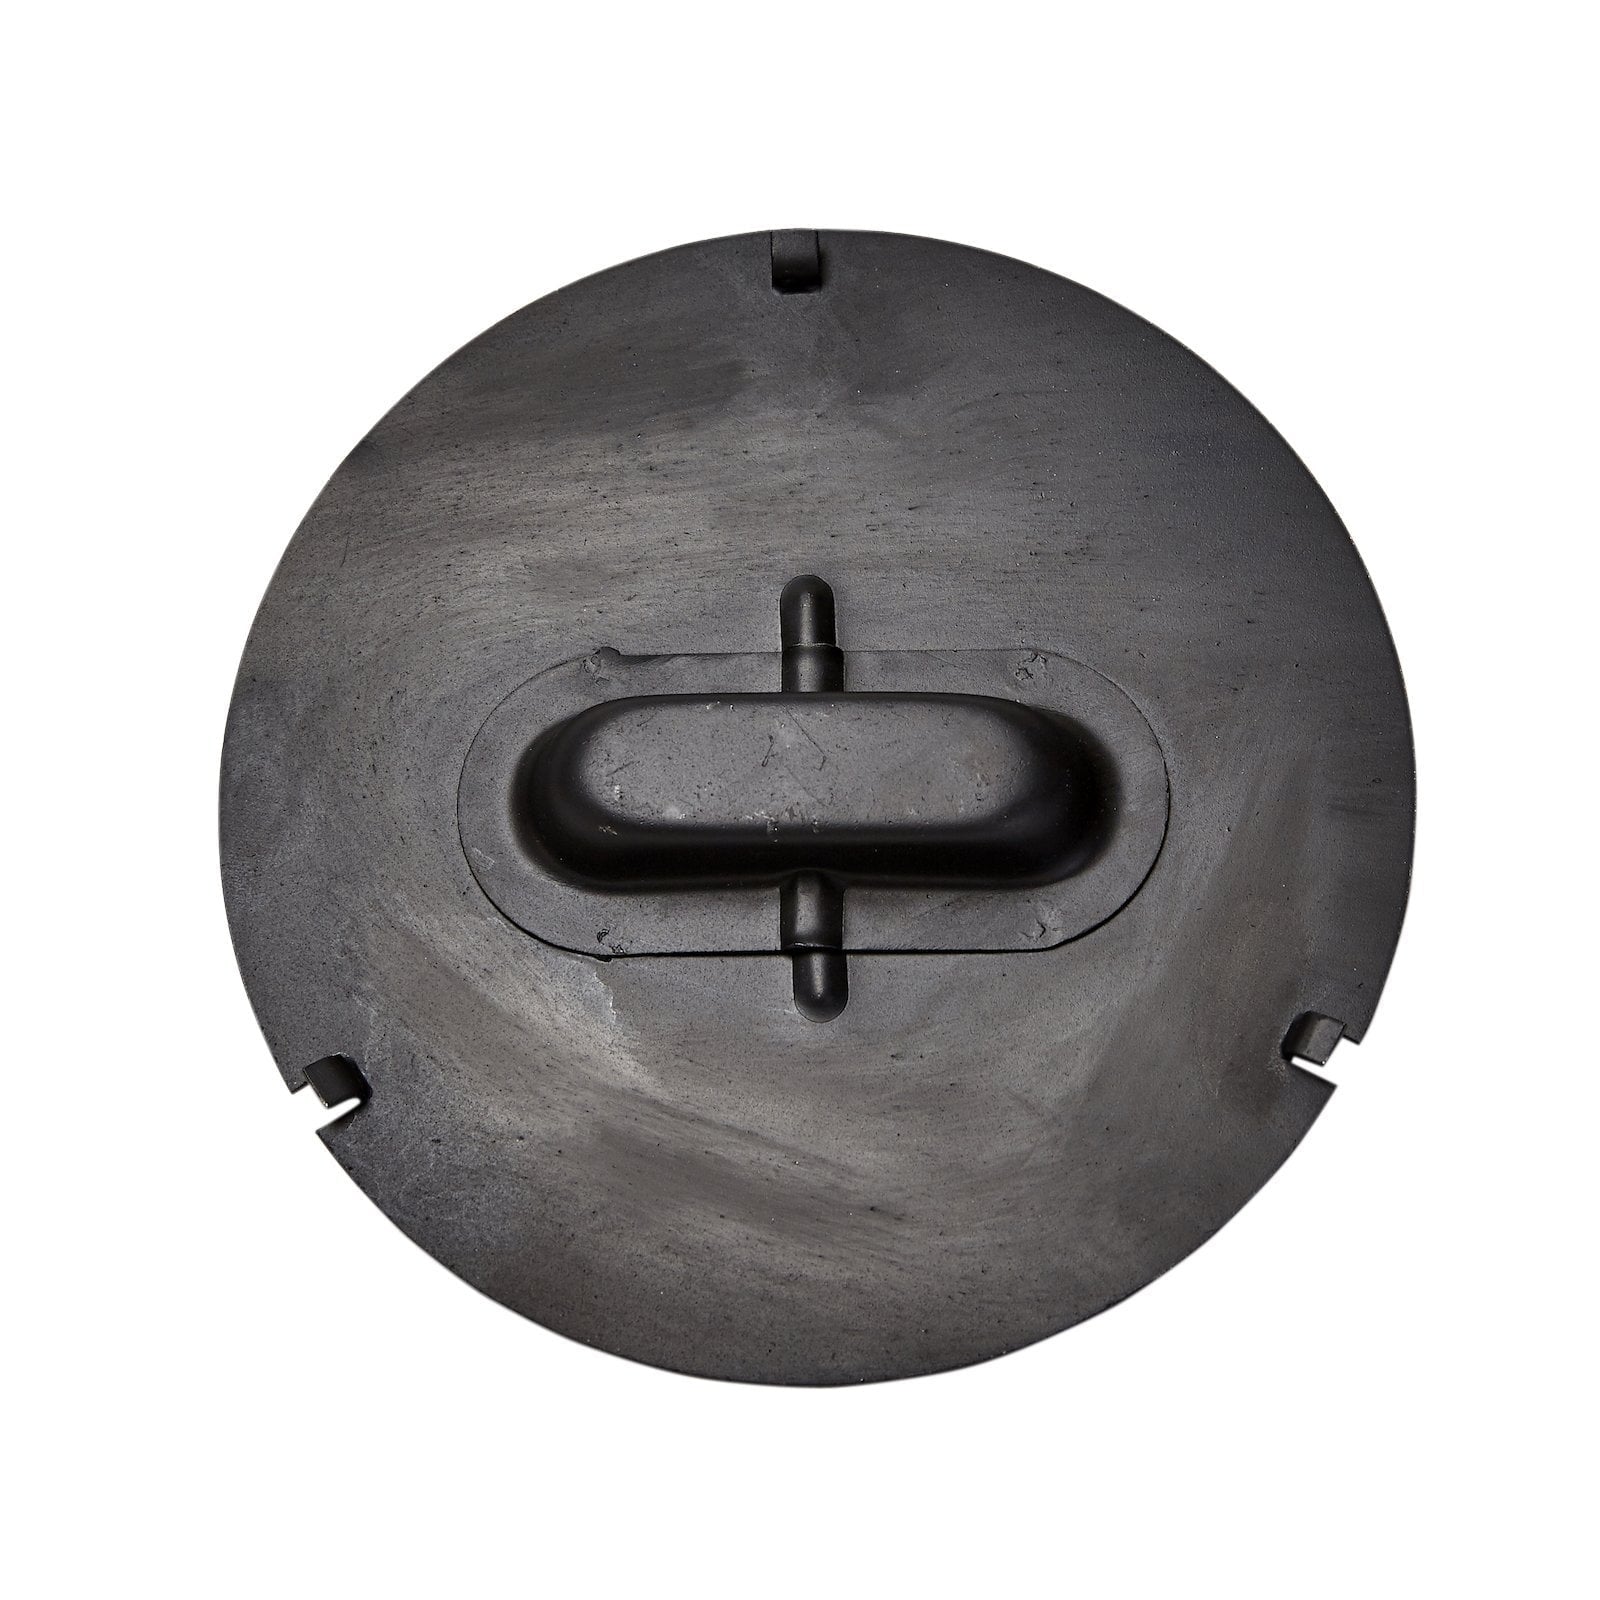 Outbacker Stove Lid